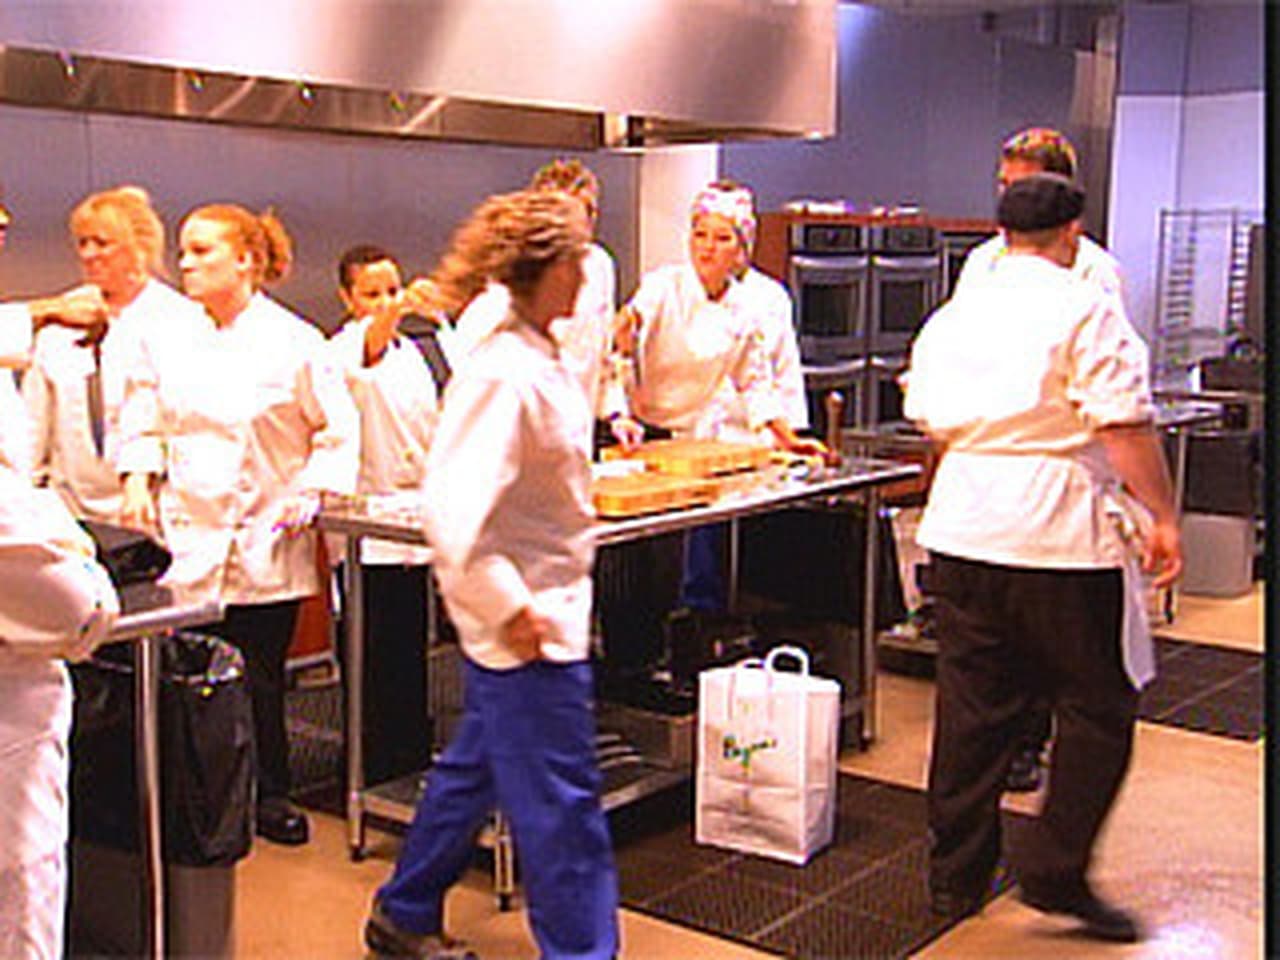 Top Chef - Season 1 Episode 1 : Who Deserves To Be Here